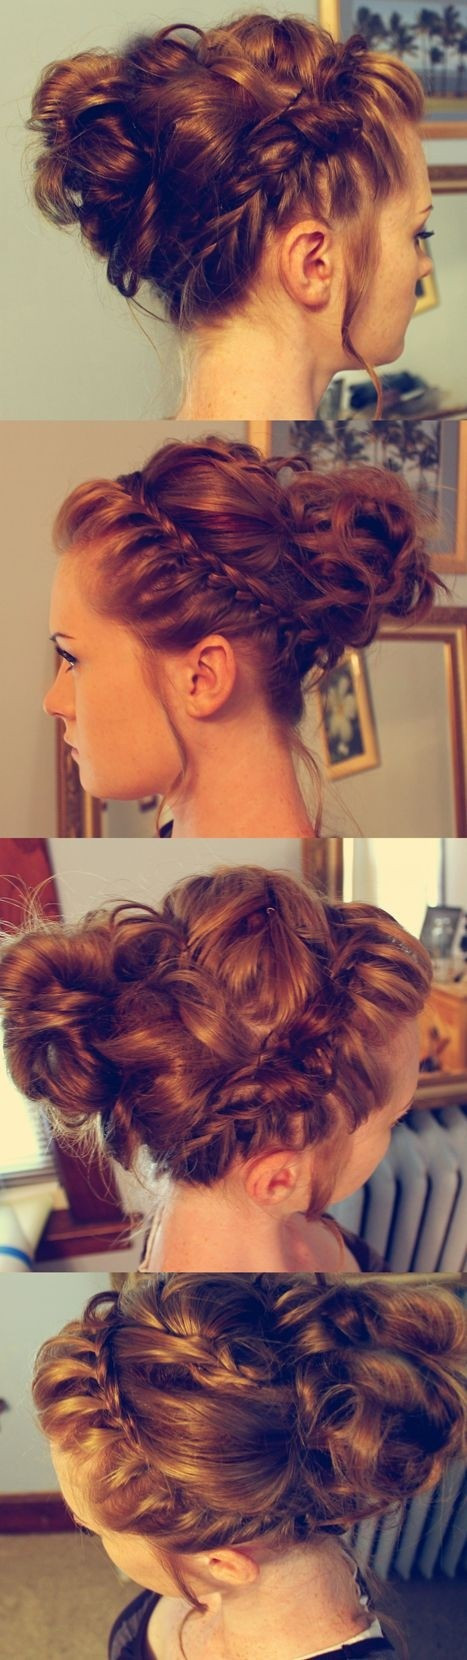 Messy Bun Prom Hairstyles
 25 Best Long Hairstyles for 2020 Half Ups & Upstyles Plus